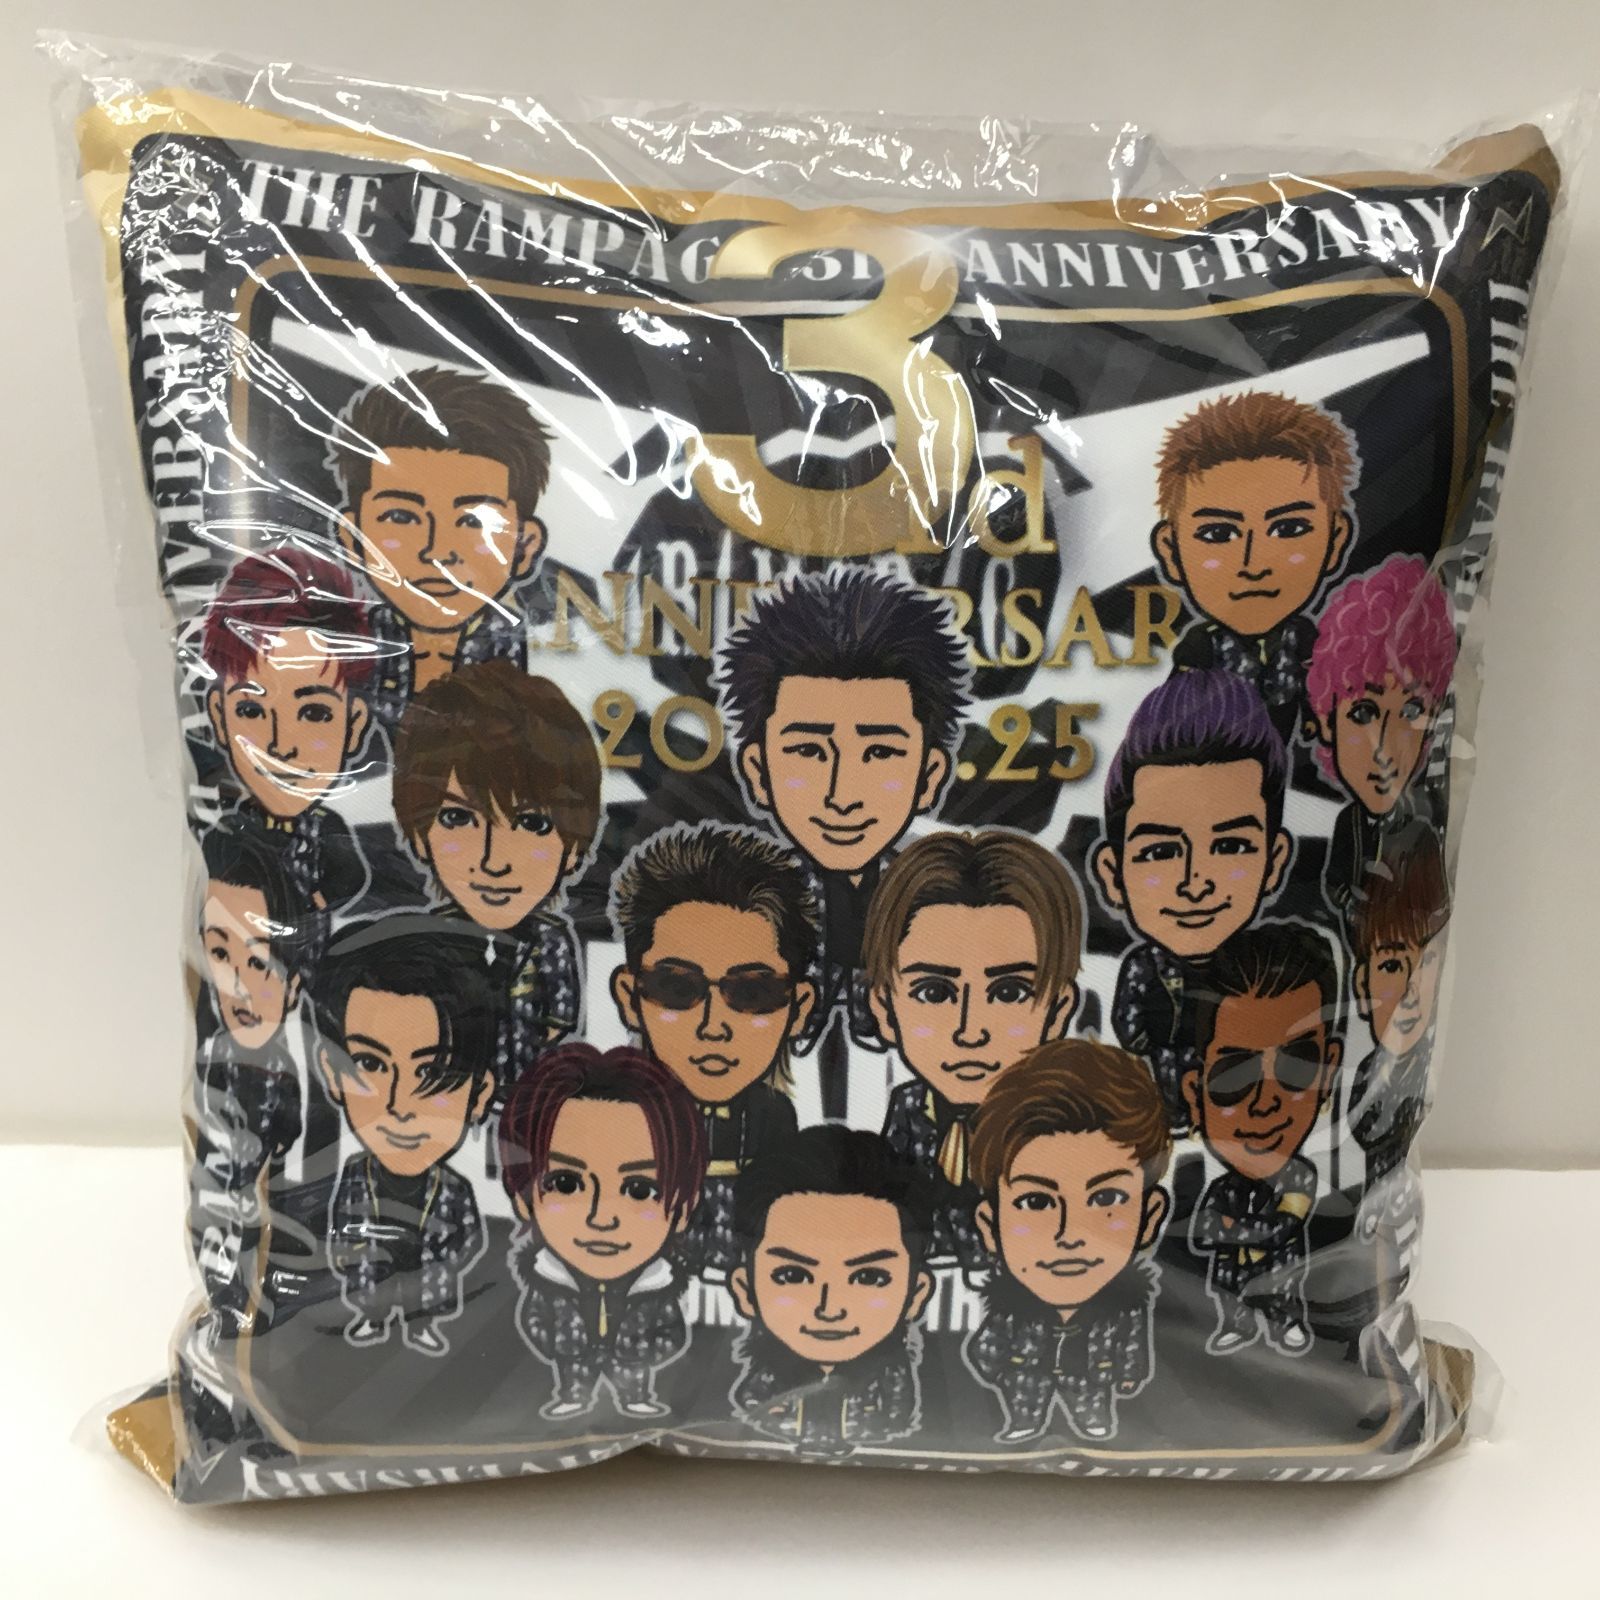 THERAMPAGE Anniversary クッション-